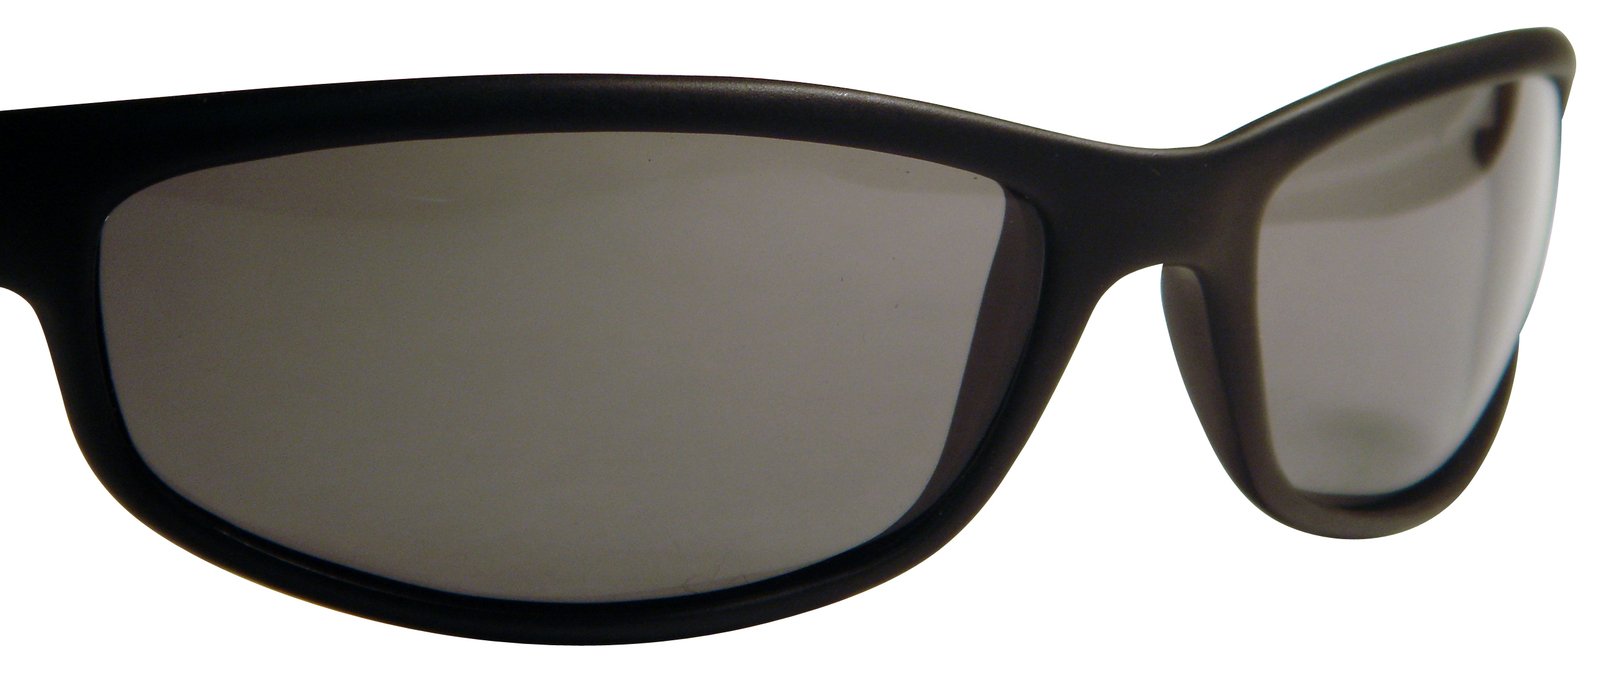 a pair of black sunglasses with grey mirrored lenses